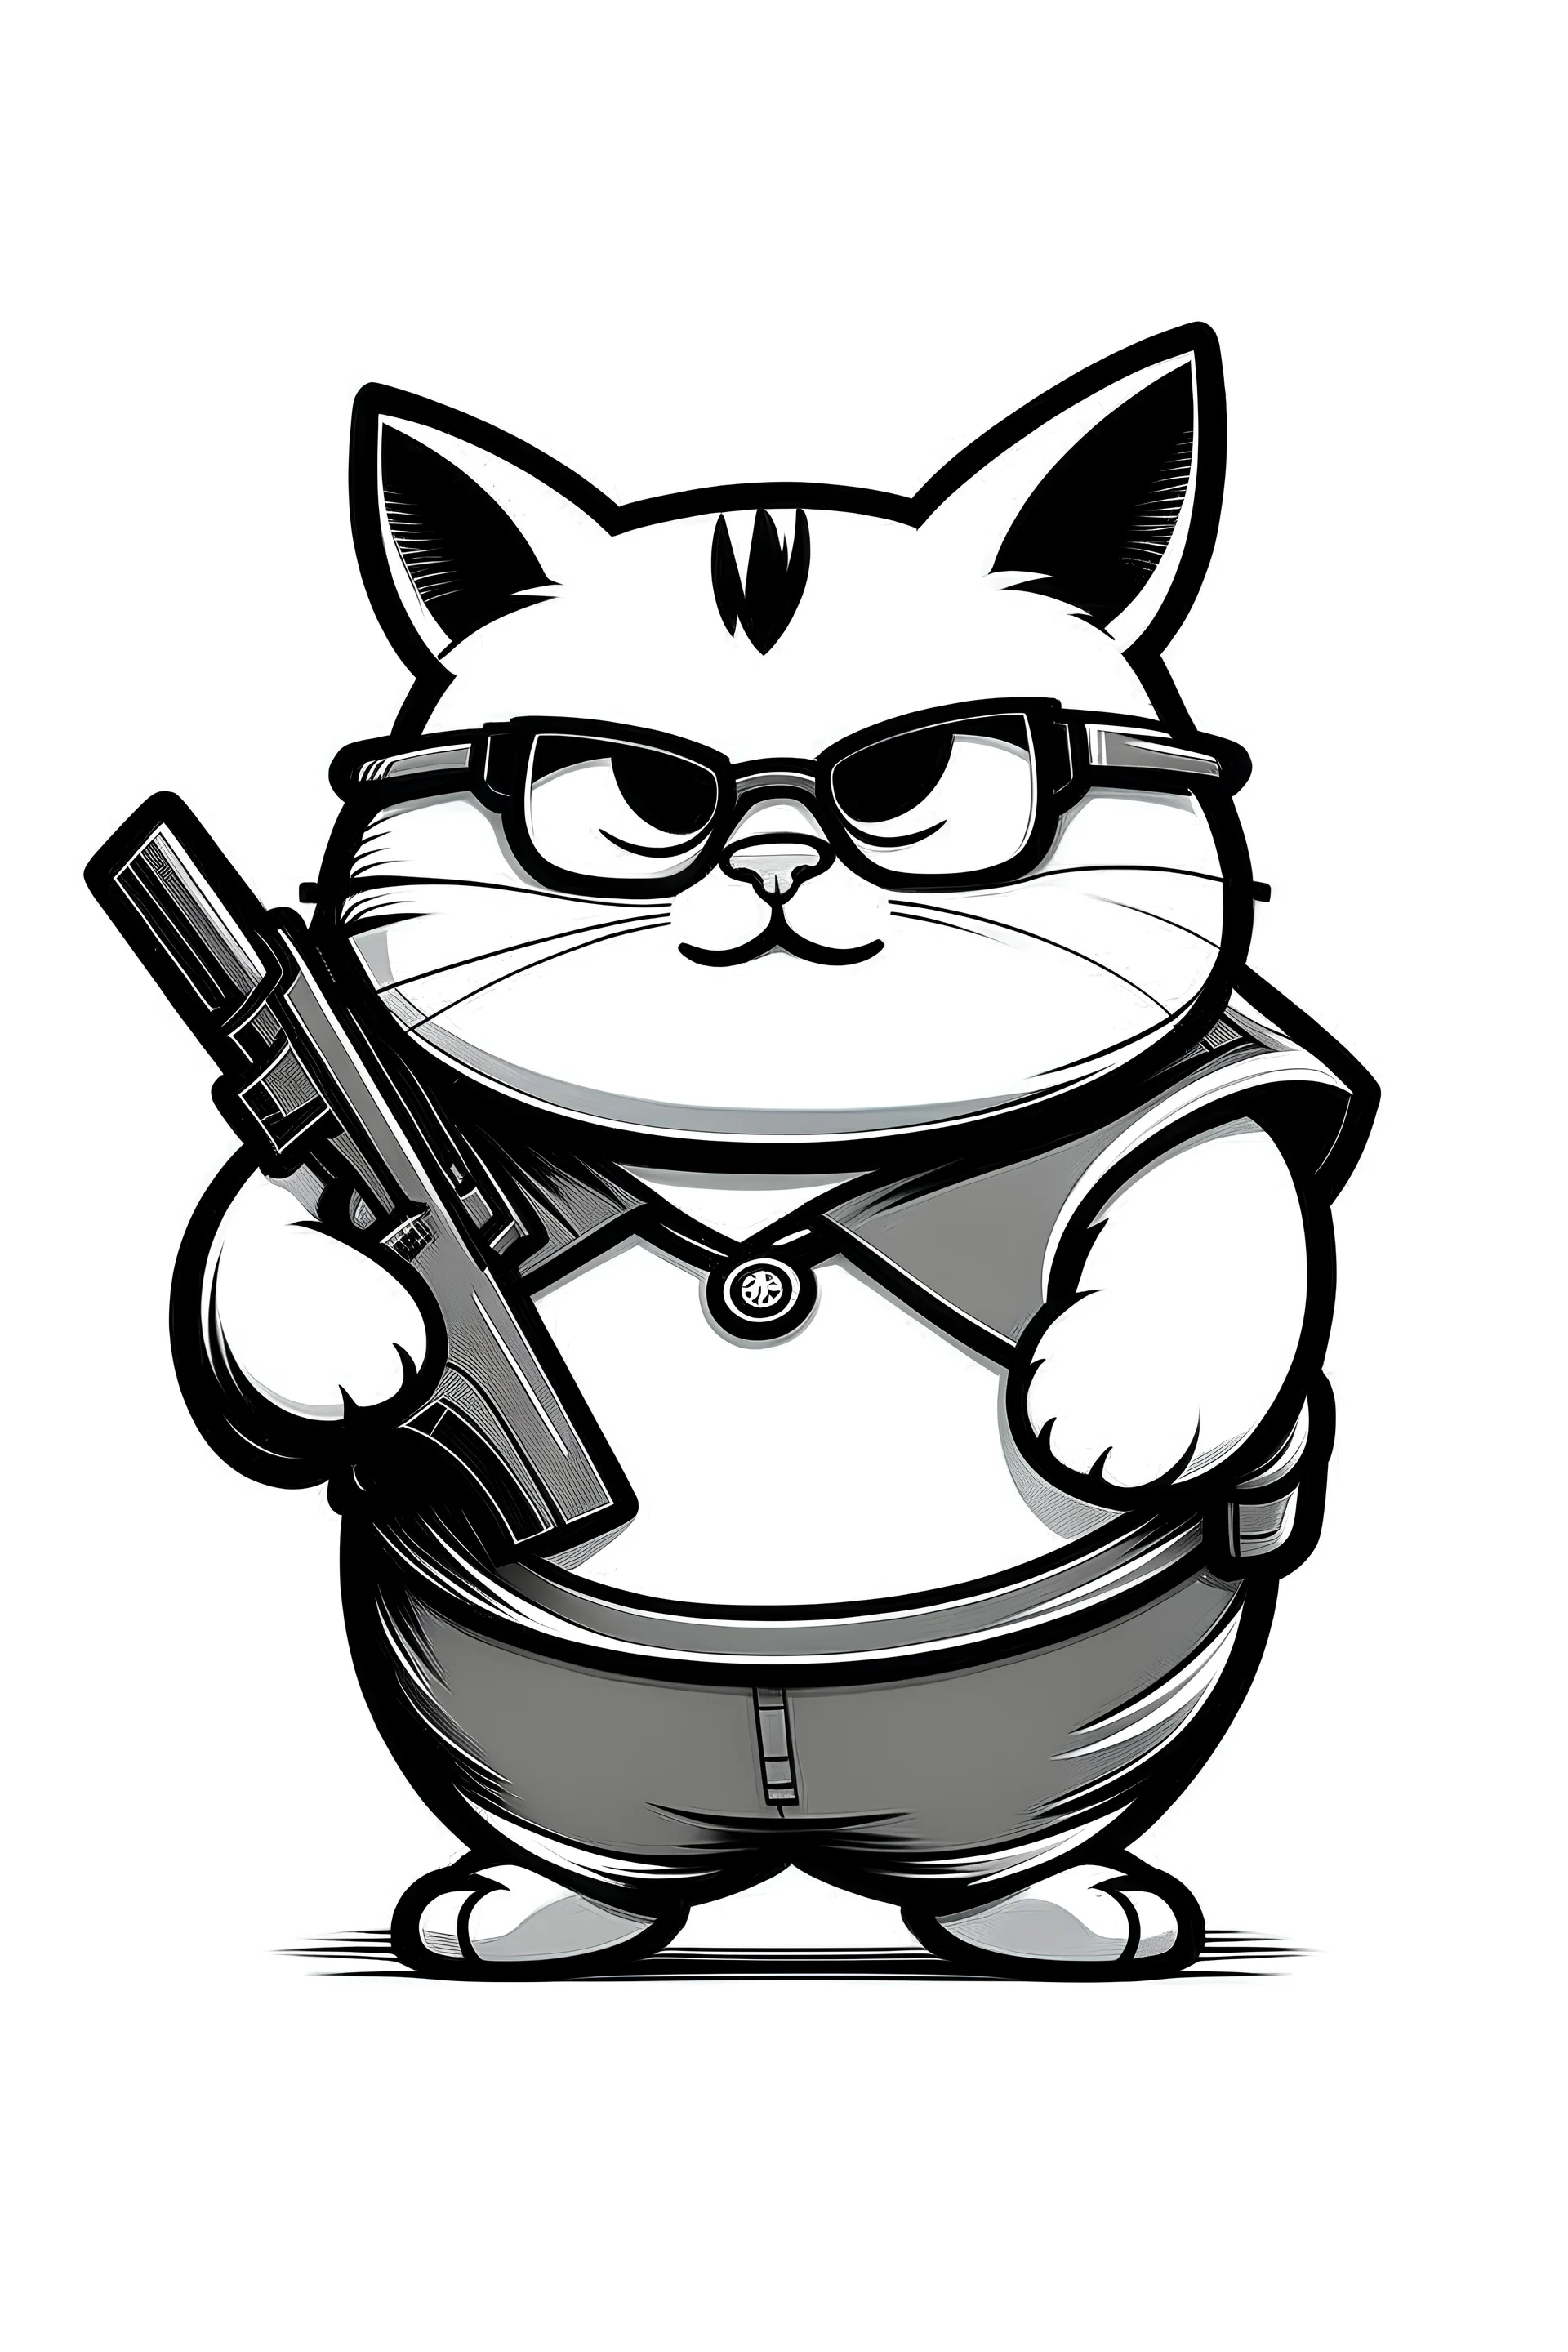 create a logo of cute fat tomcat with glasses carrying gun in its hands. logo must be transparent with no colors. don't include full body